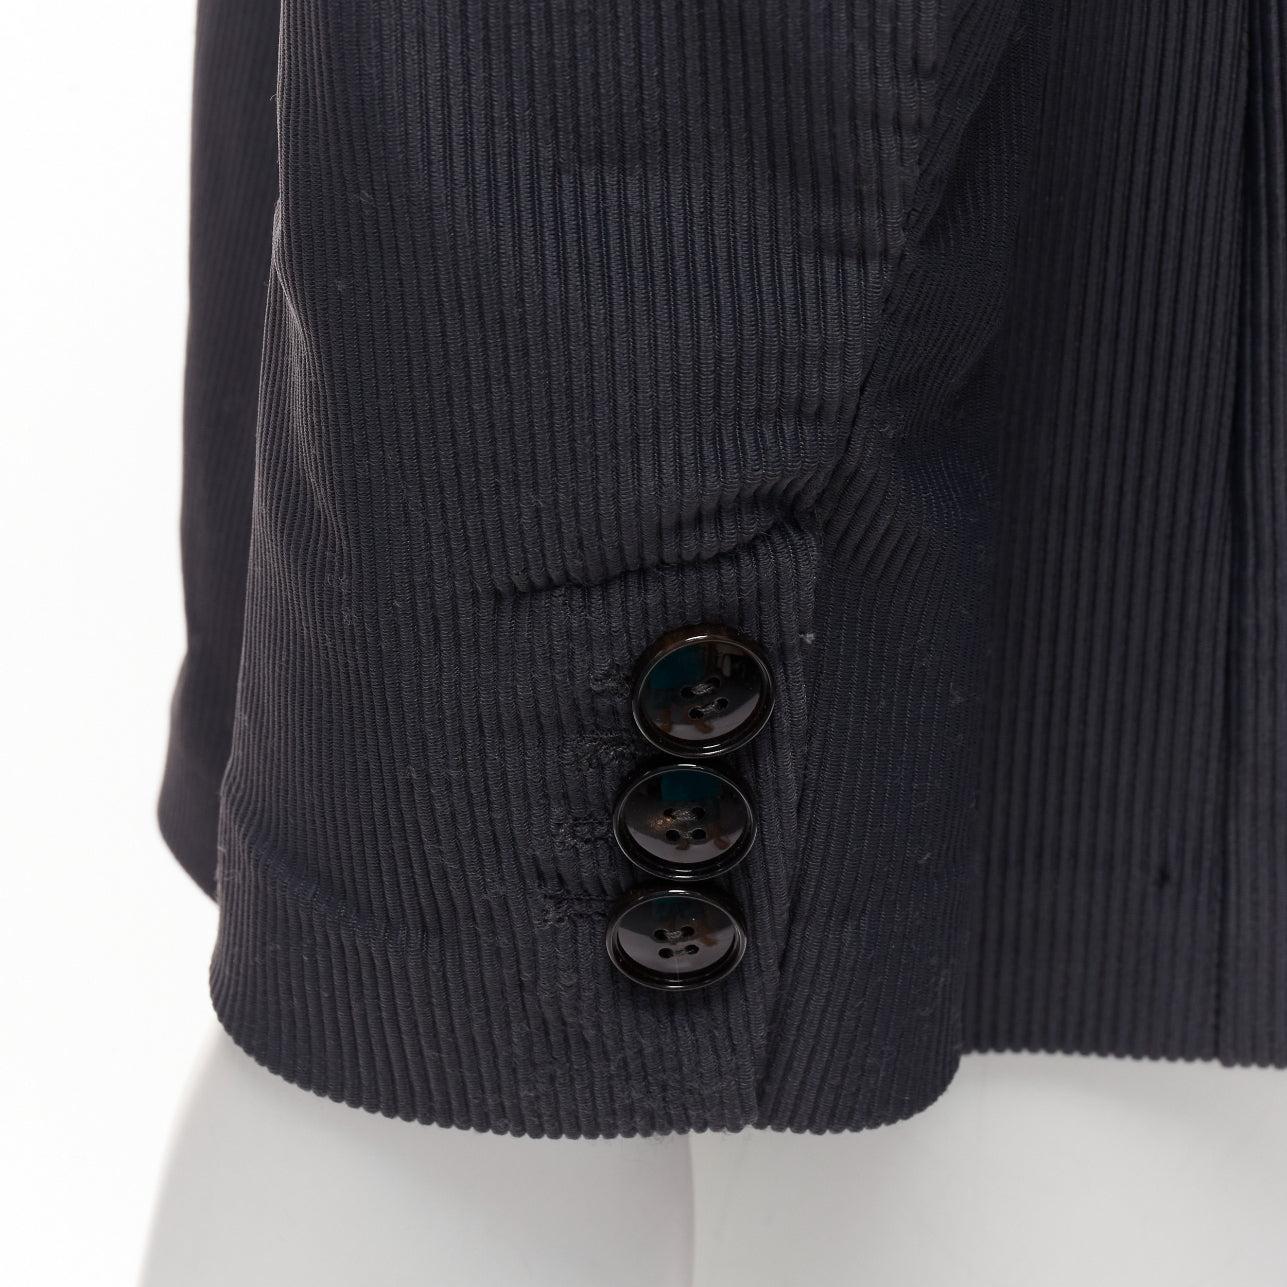 GIORGIO ARMANI grey ribbed fabric buttons single breasted blazer IT50 L
Reference: JSLE/A00108
Brand: Giorgio Armani
Material: Fabric
Color: Grey
Pattern: Solid
Closure: Button
Lining: Grey Fabric
Extra Details: Single